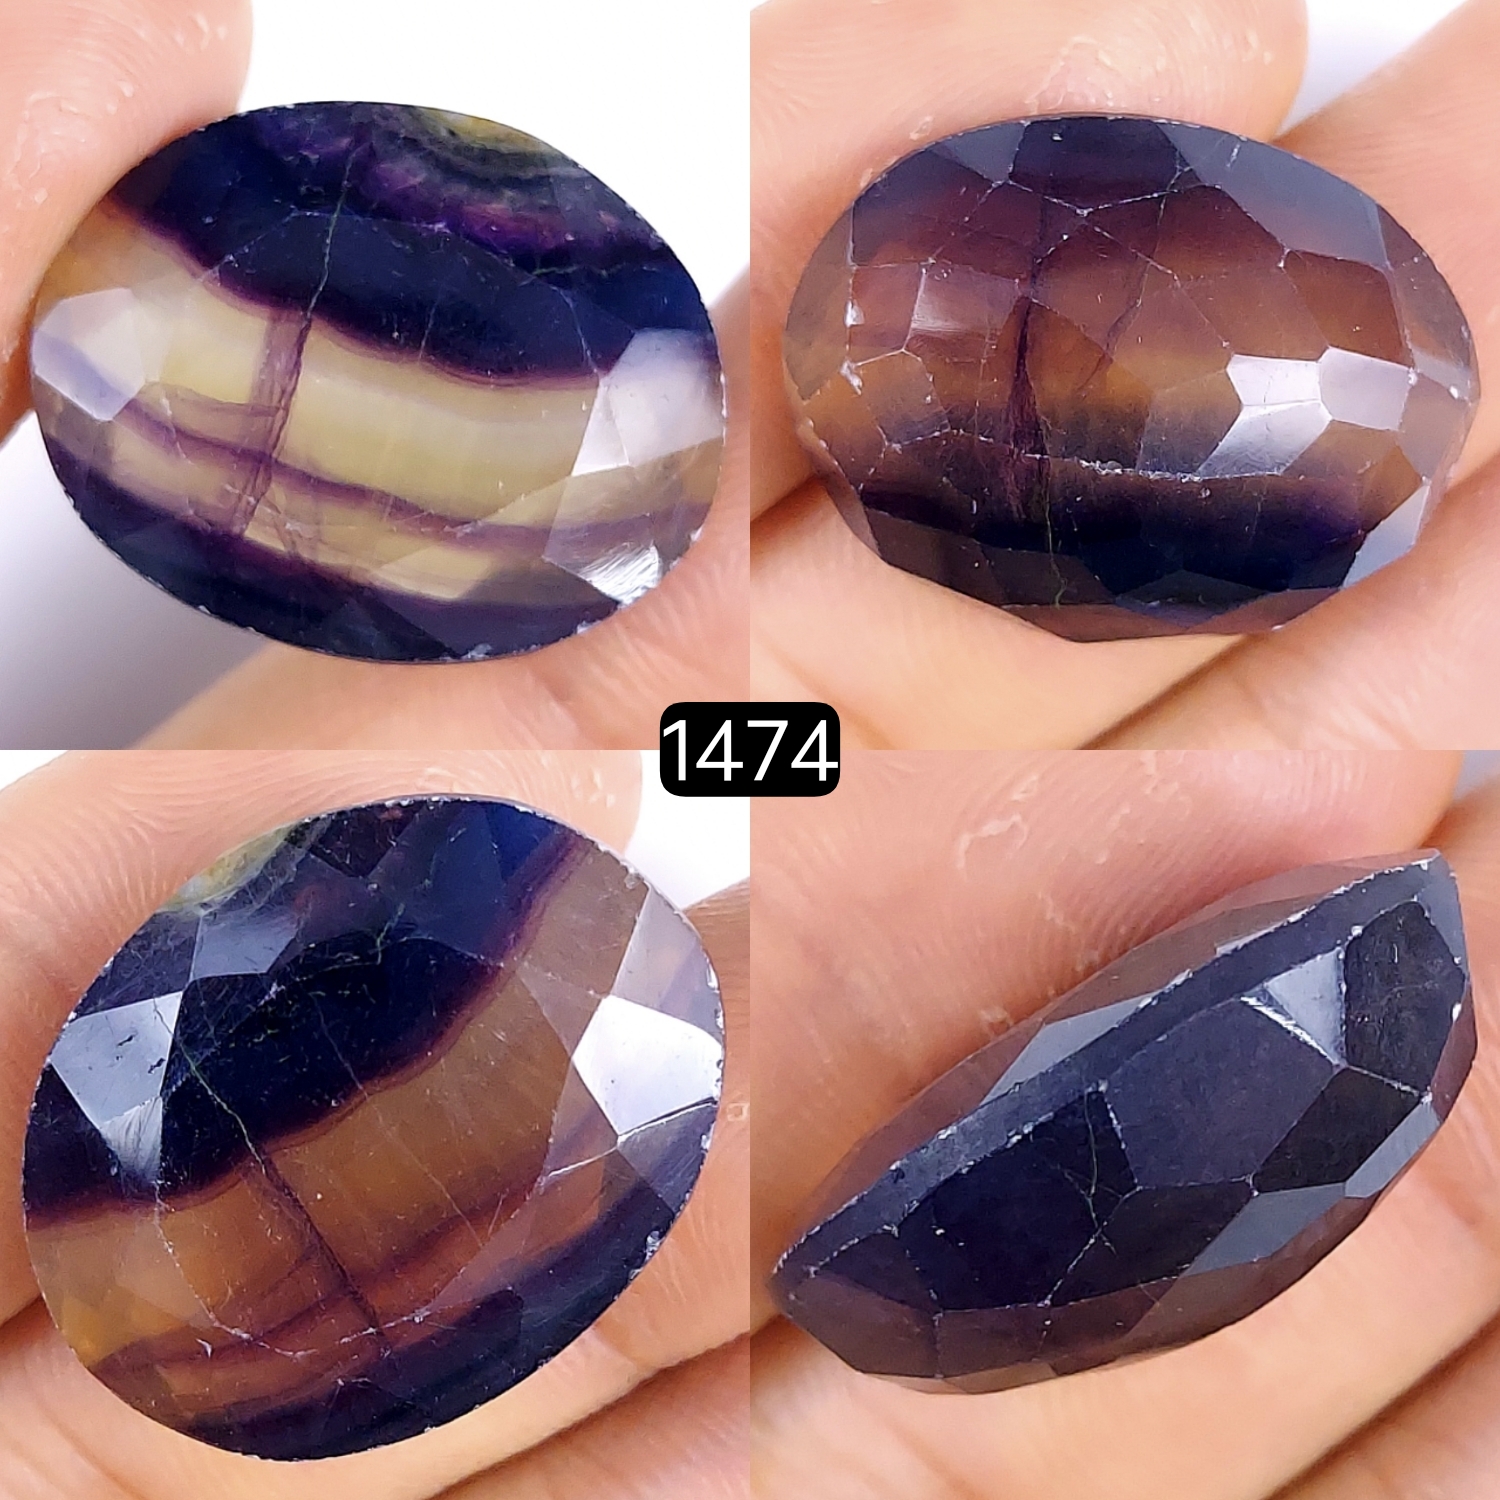 1Pc 59Cts Natural Multi Fluorite Faceted Cabochon Gemstone Oval Shape Crystal 28x22mm#1474